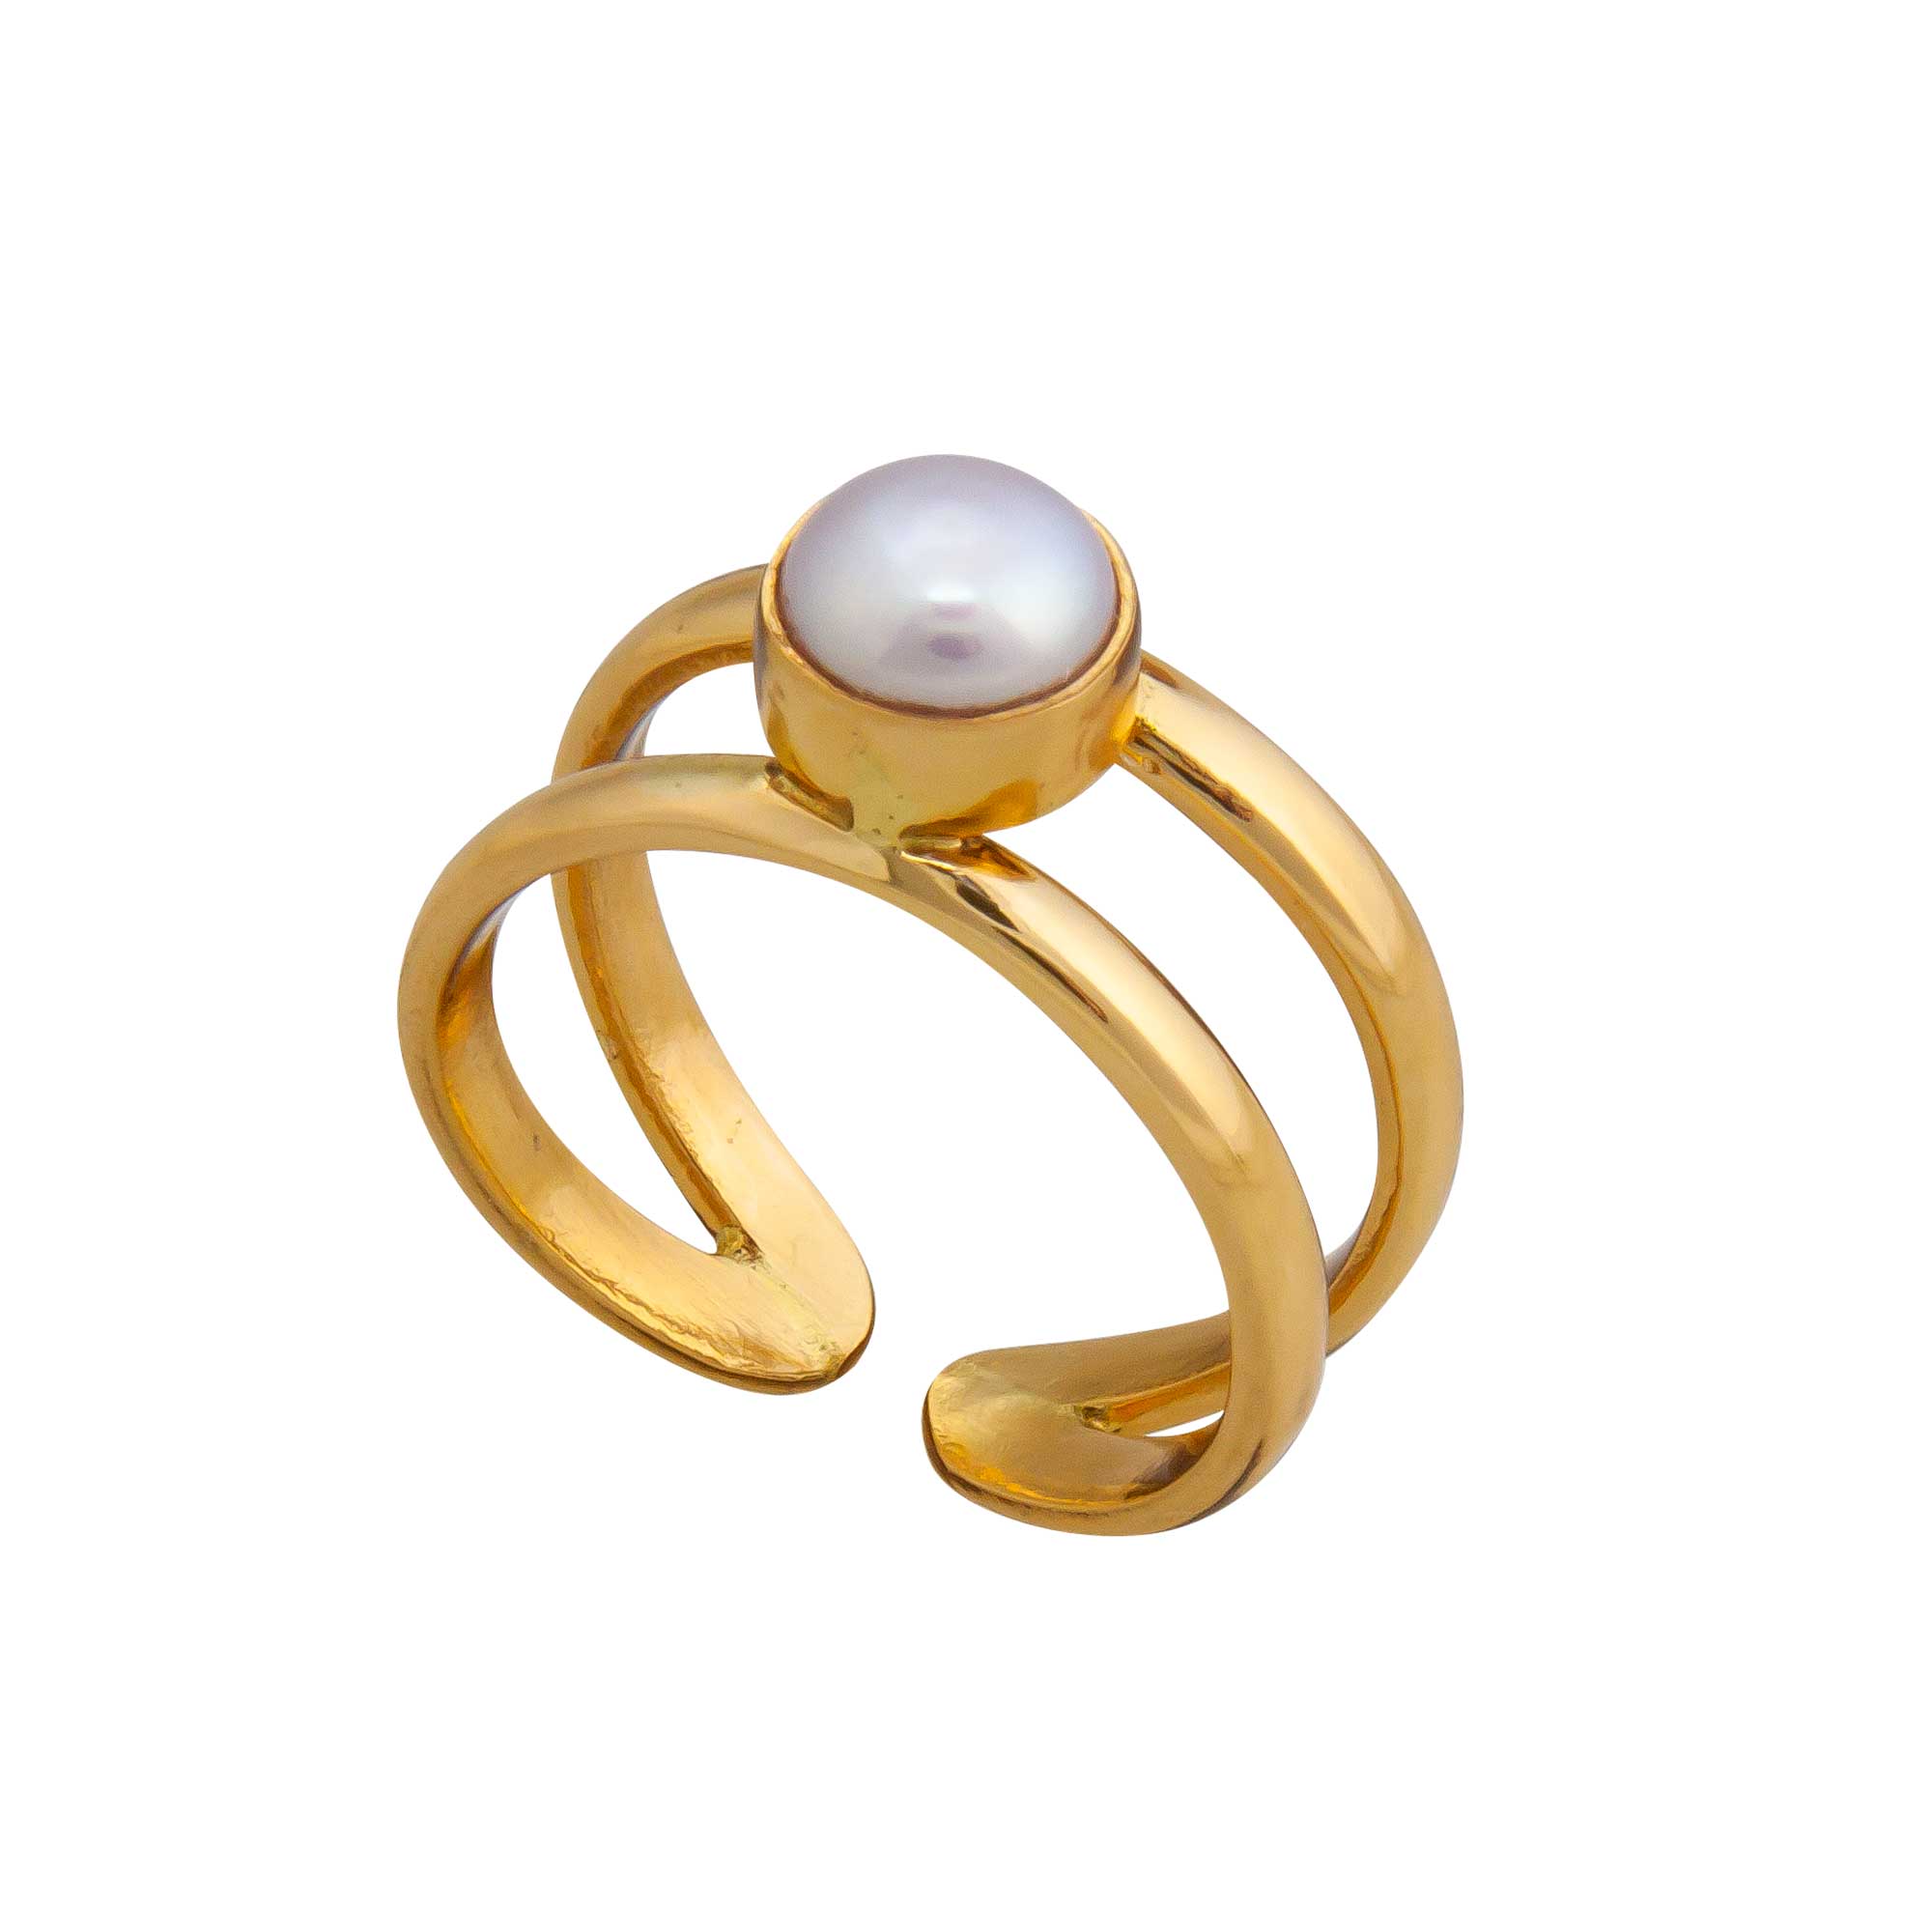 Alchemia Pearl Double Band Adjustable Ring | Charles Albert Jewelry